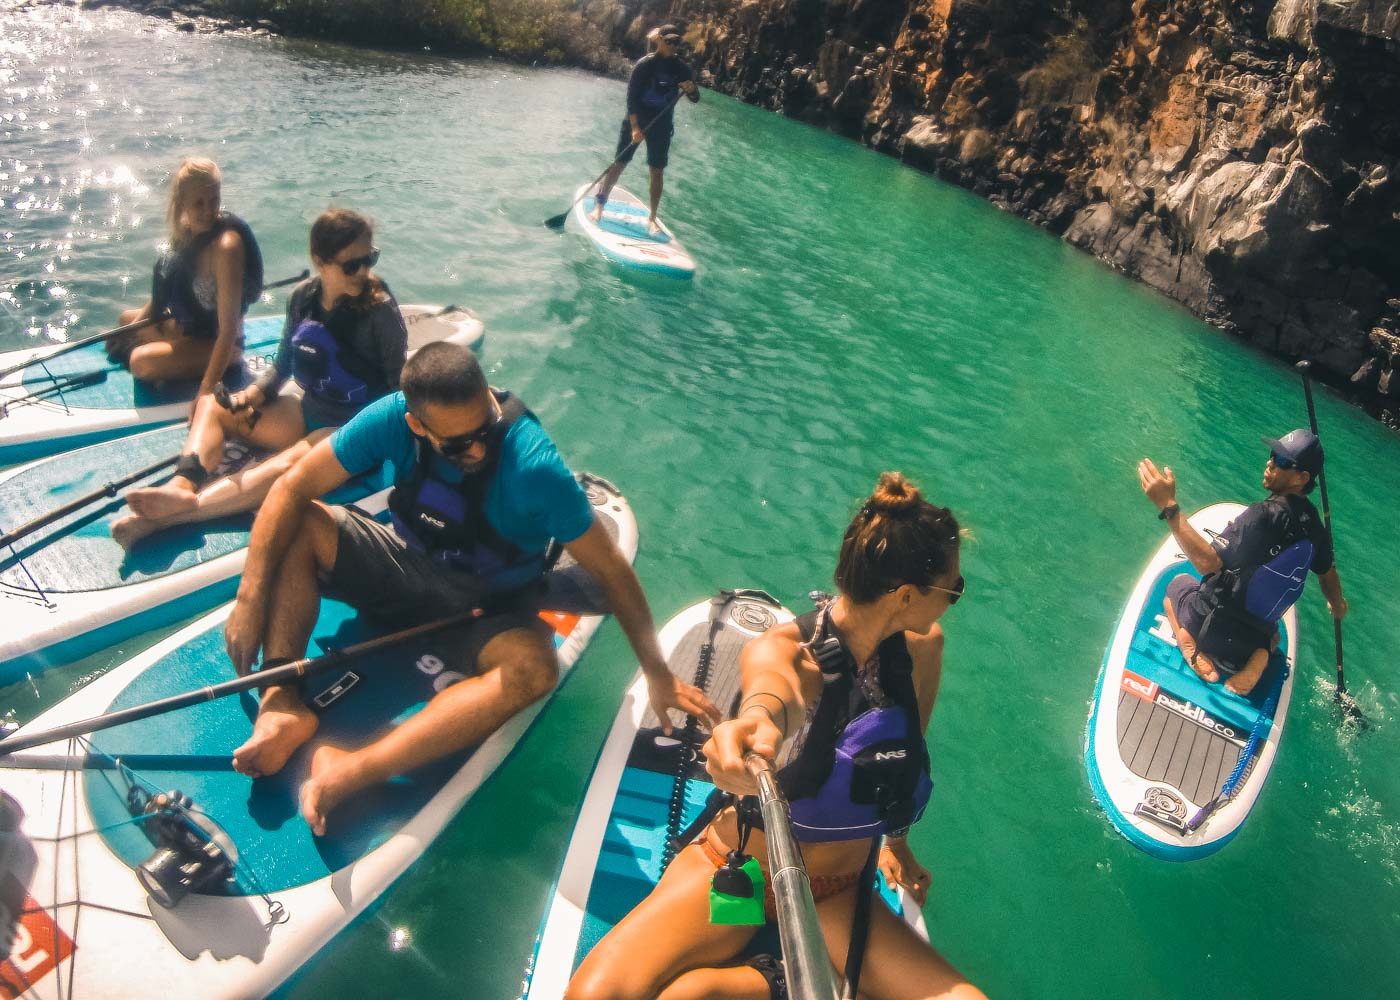 SUP adventures on Santa Cruz island with our Galakiwi group